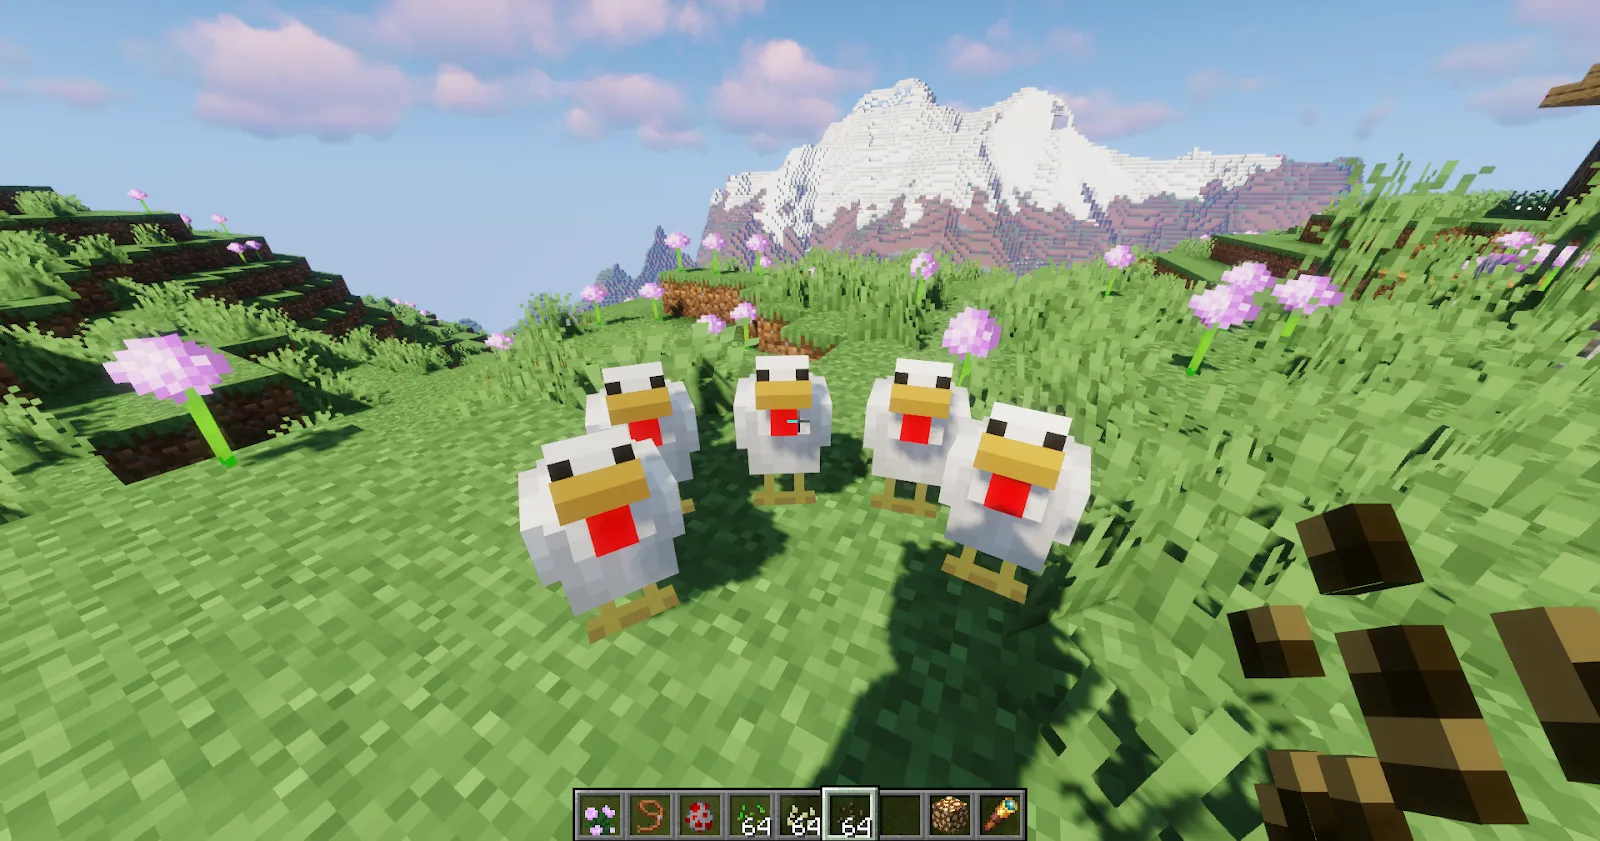 Leading Minecraft chickens with seeds